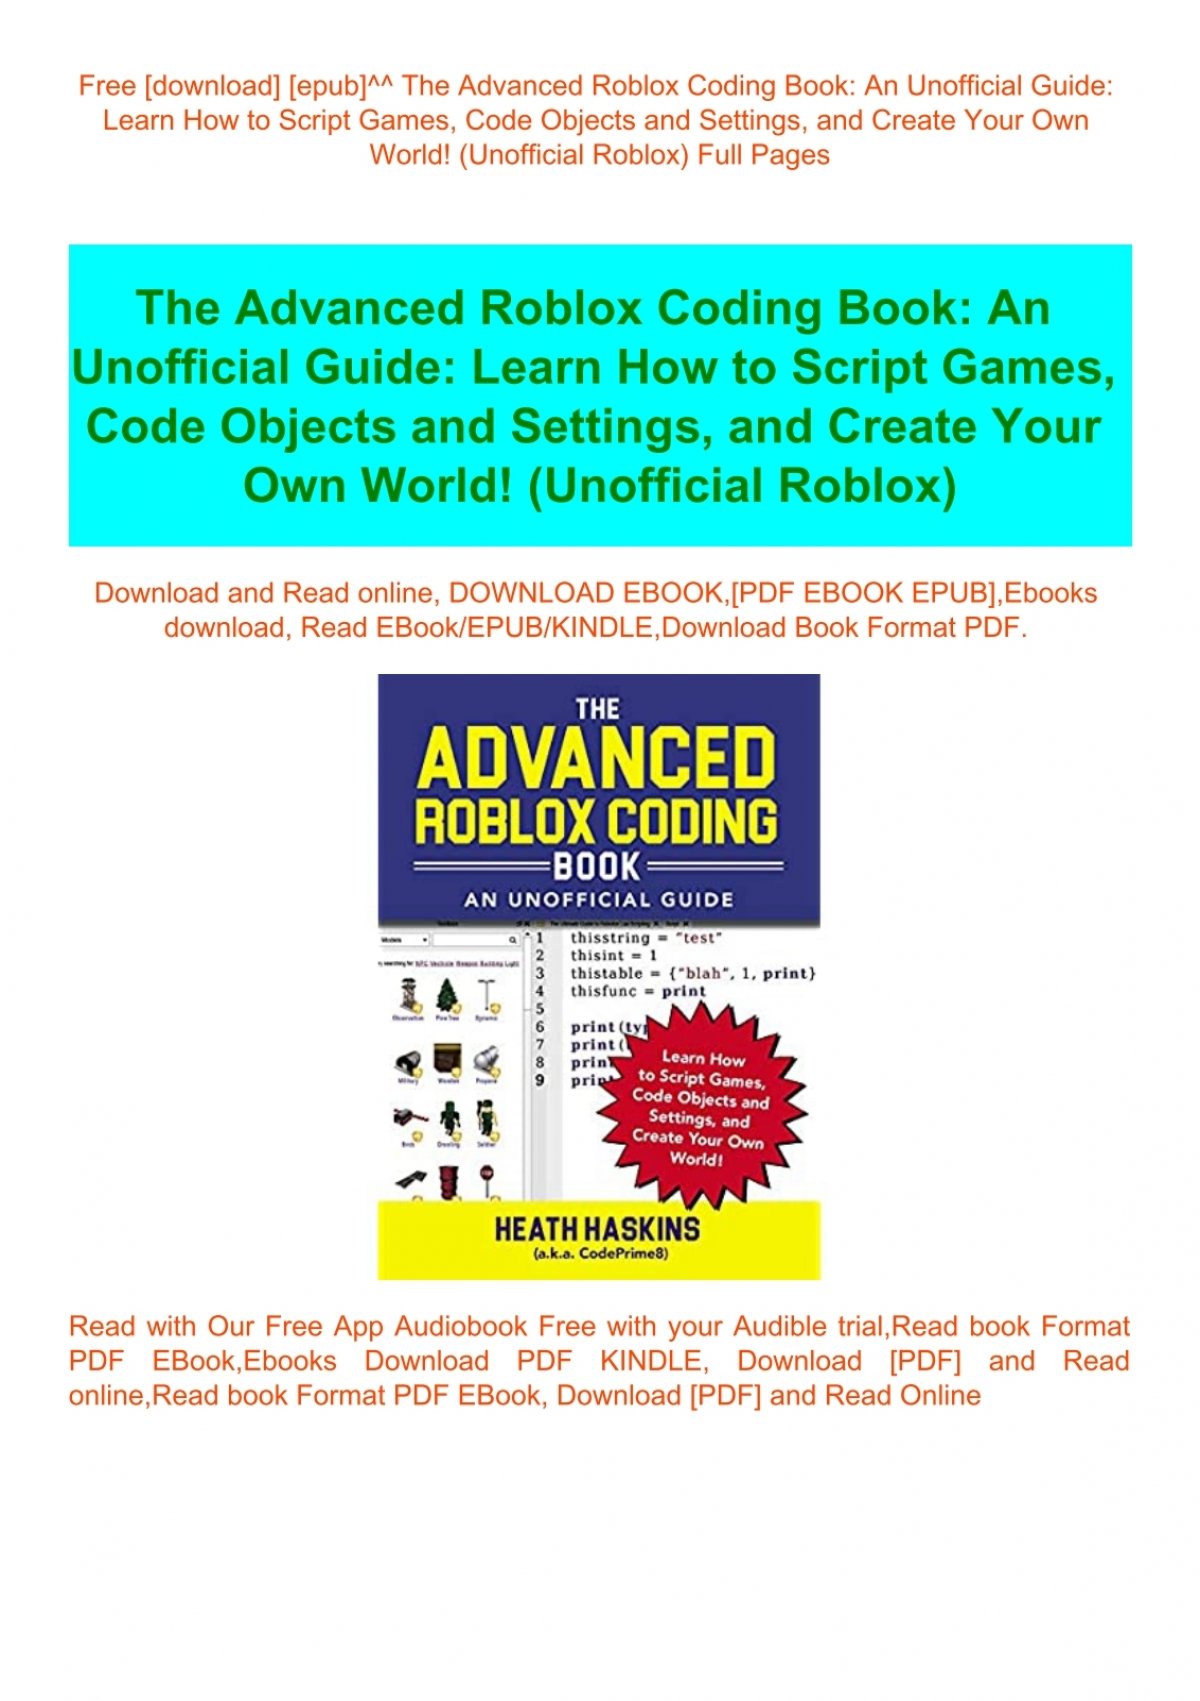 Free Download Epub The Advanced Roblox Coding Book An Unofficial Guide Learn How To Script Games Code Objects And Settings And Create Your Own World Unofficial Roblox Full Pages - unofficial roblox new roblox log in page